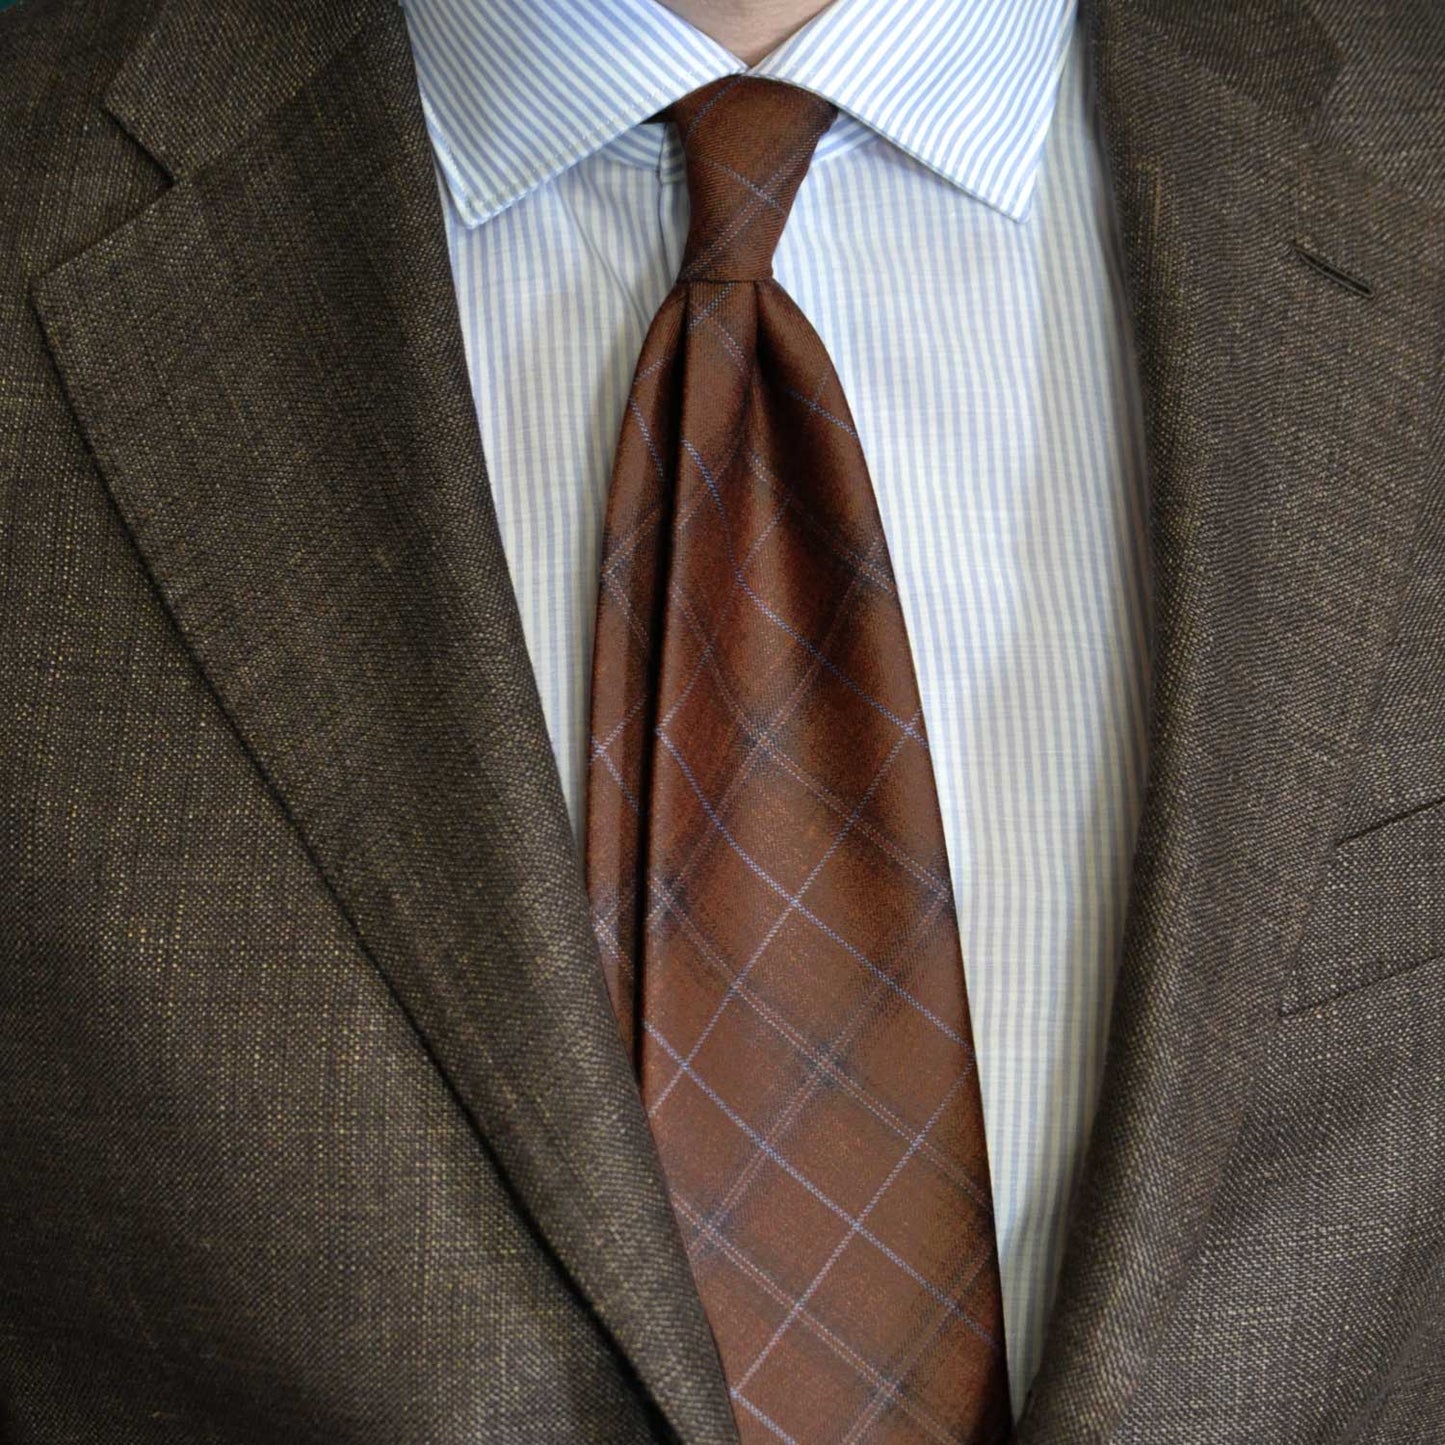 F.Marino Checked Wool Tie 3 Folds Rust-Wools Boutique Uomo